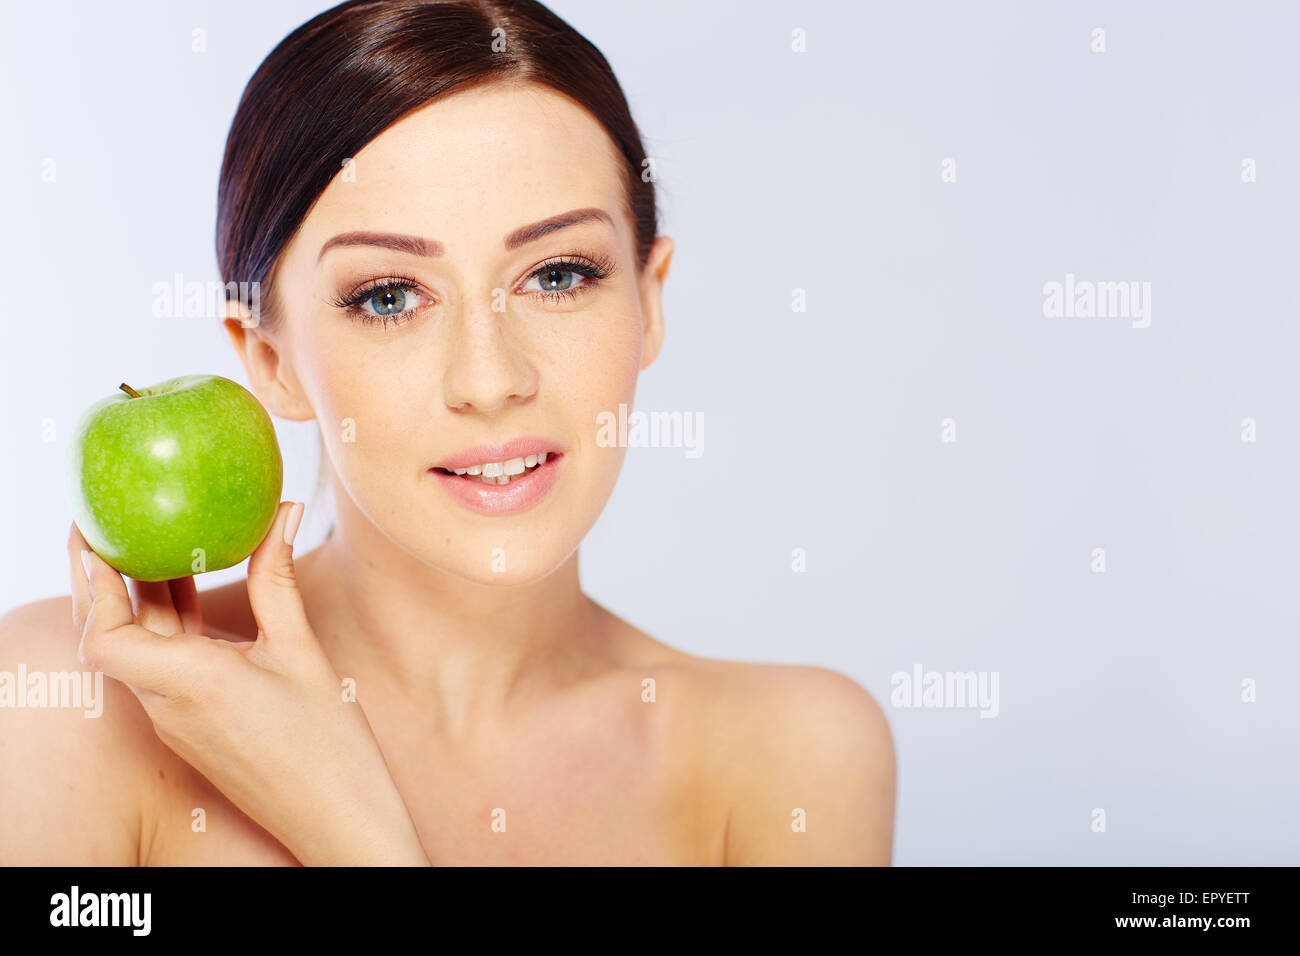 woman with a green apple Stock Photo